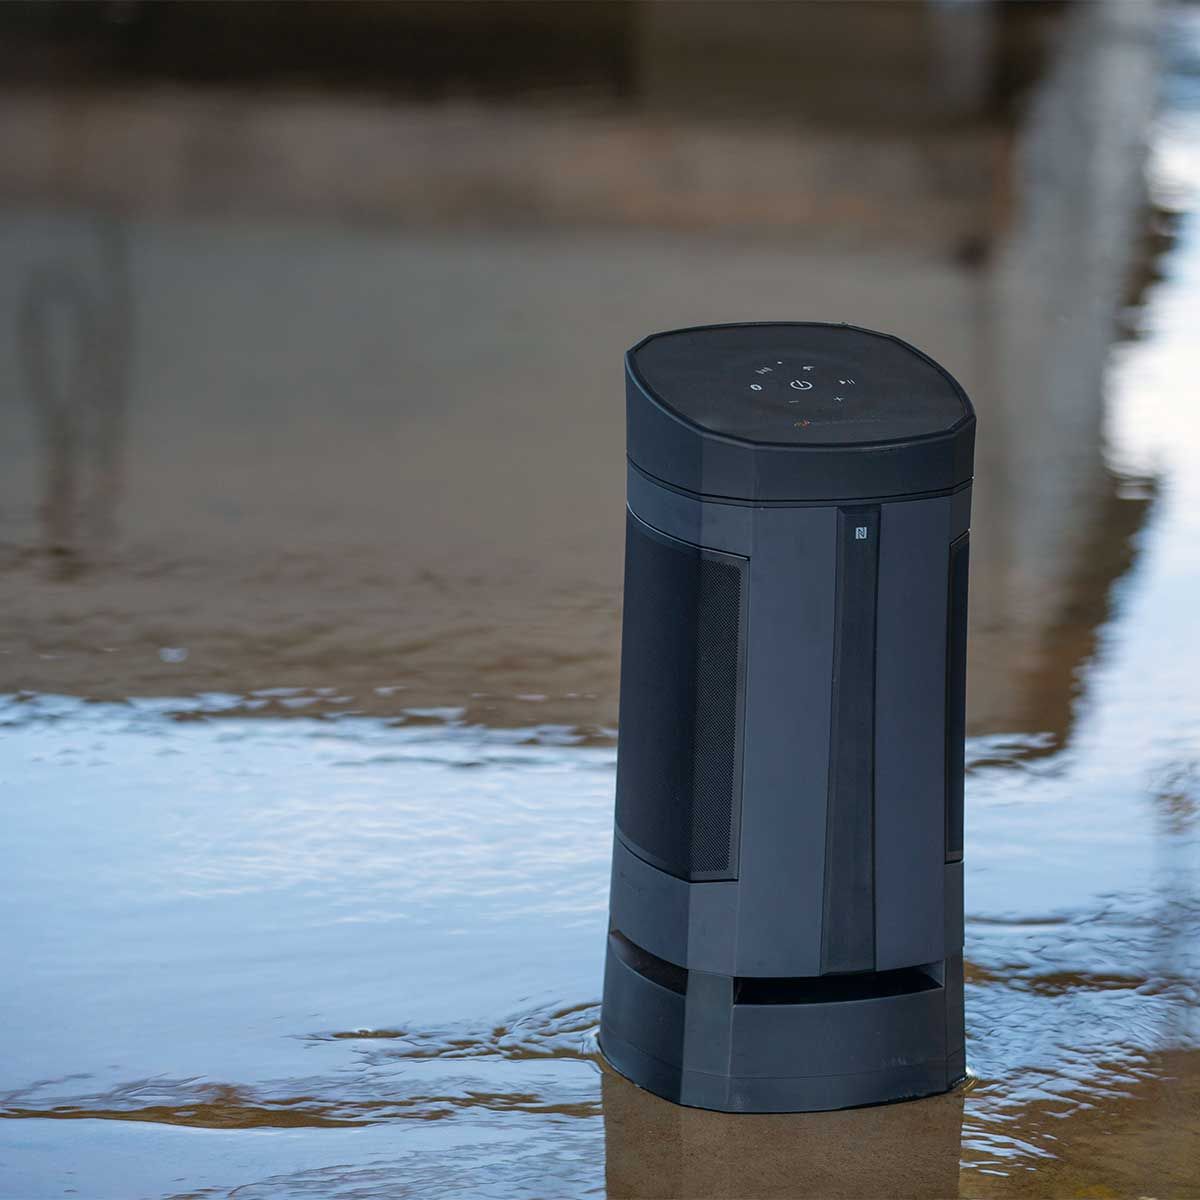 Close-up shot of the Soundcast VG5 Portable Waterproof Bluetooth Speaker's front view in water at the beach.